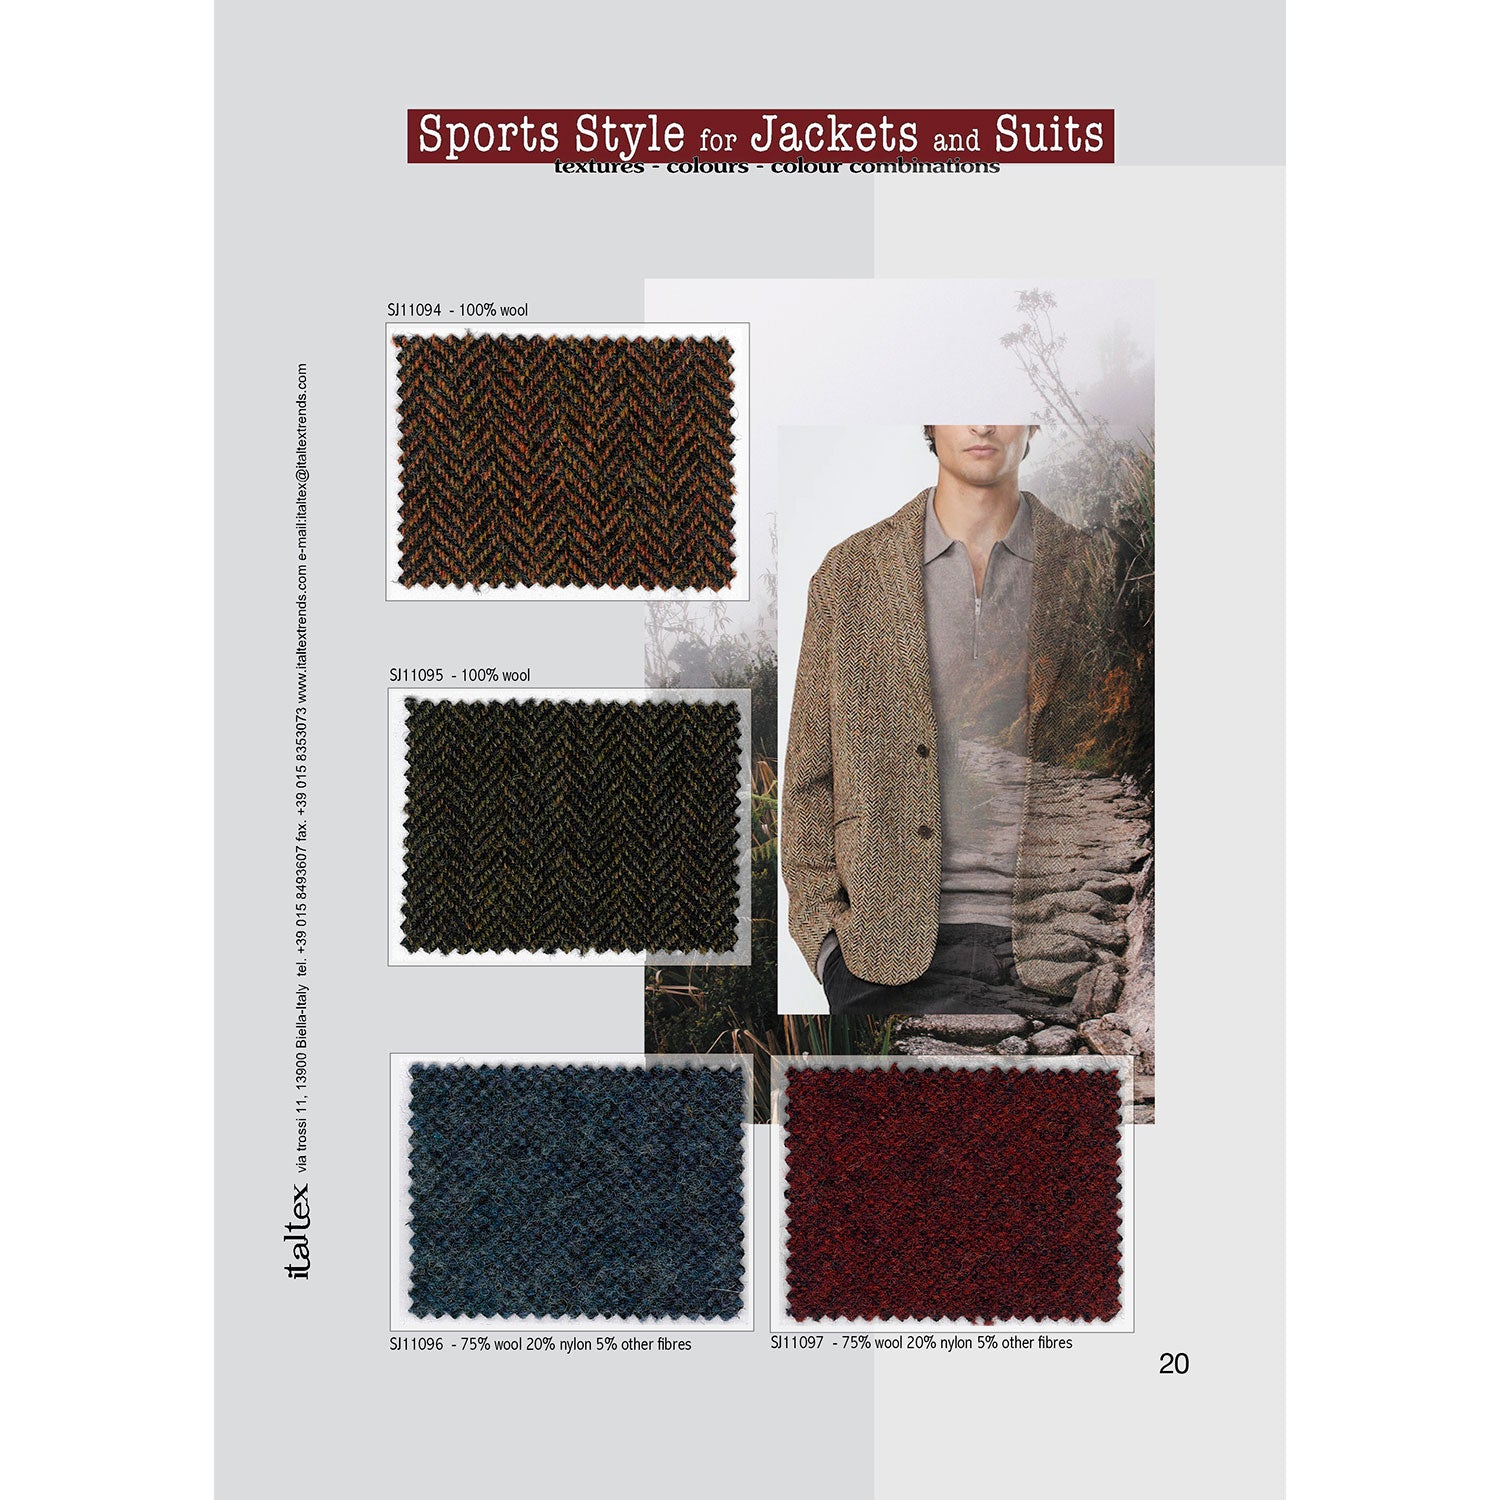 Four fabric swatches for men's jackets winter 2025. Two are herringbones with in neautiful mixture colours. The first one is in red and orange brown shades. The second one in grenish brown shades. The two fabric swatches at the bottom are fake plains  with subdued kemp yarns. One is a bluish grey, the other one is in dark red.